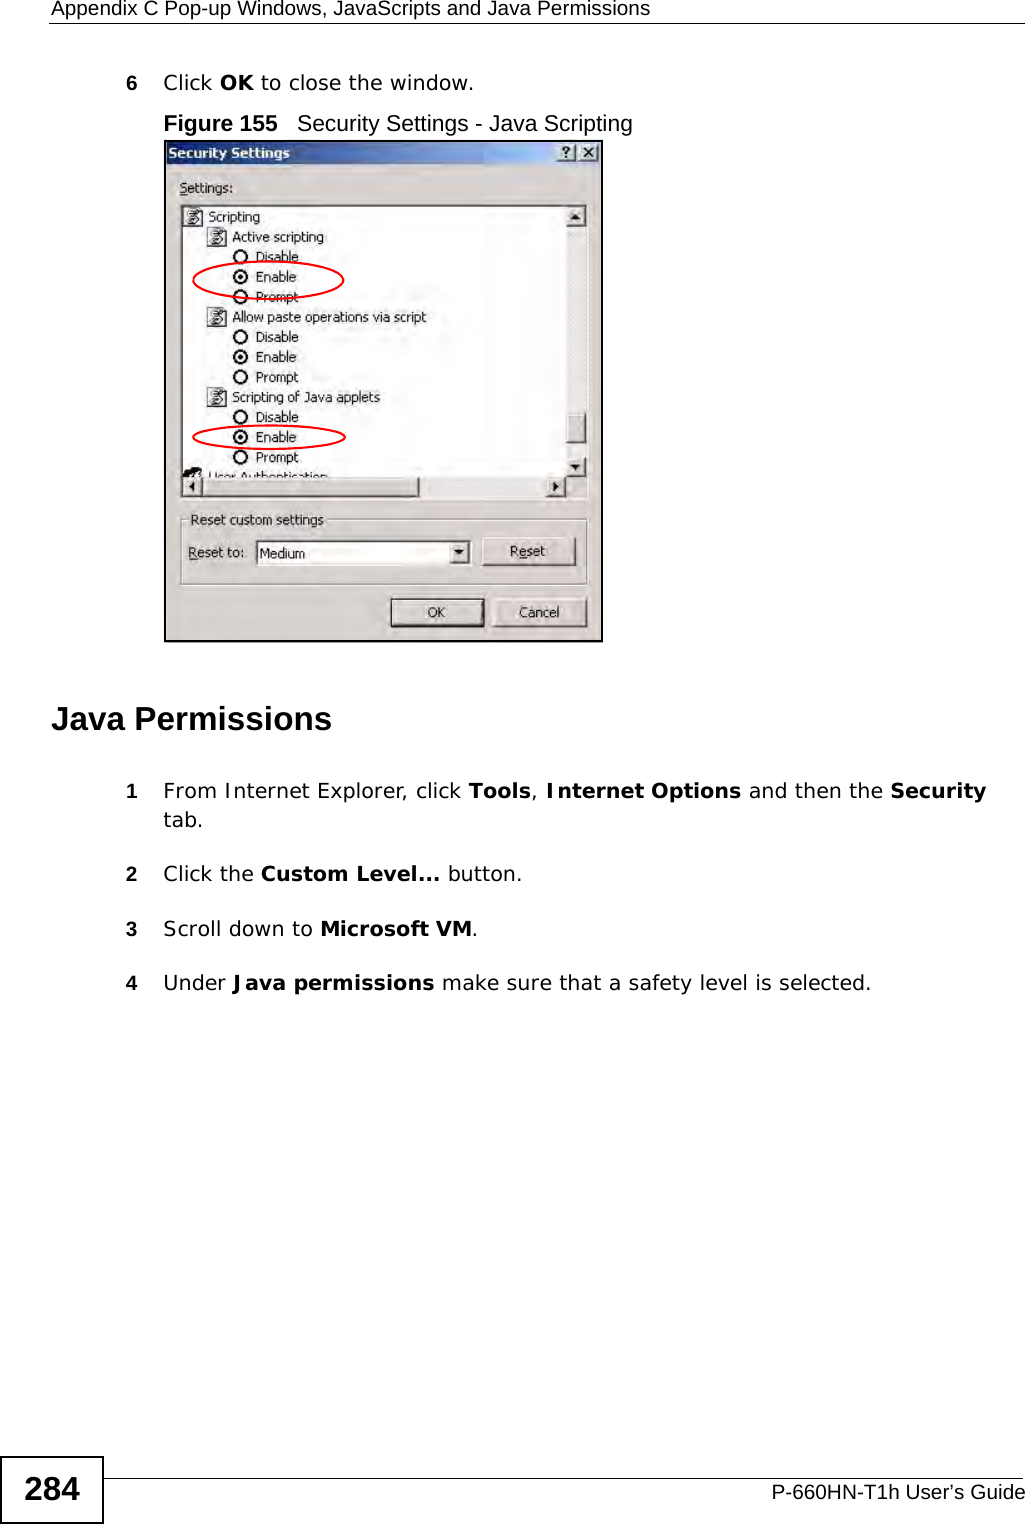 Appendix C Pop-up Windows, JavaScripts and Java PermissionsP-660HN-T1h User’s Guide2846Click OK to close the window.Figure 155   Security Settings - Java ScriptingJava Permissions1From Internet Explorer, click Tools, Internet Options and then the Security tab. 2Click the Custom Level... button. 3Scroll down to Microsoft VM. 4Under Java permissions make sure that a safety level is selected.